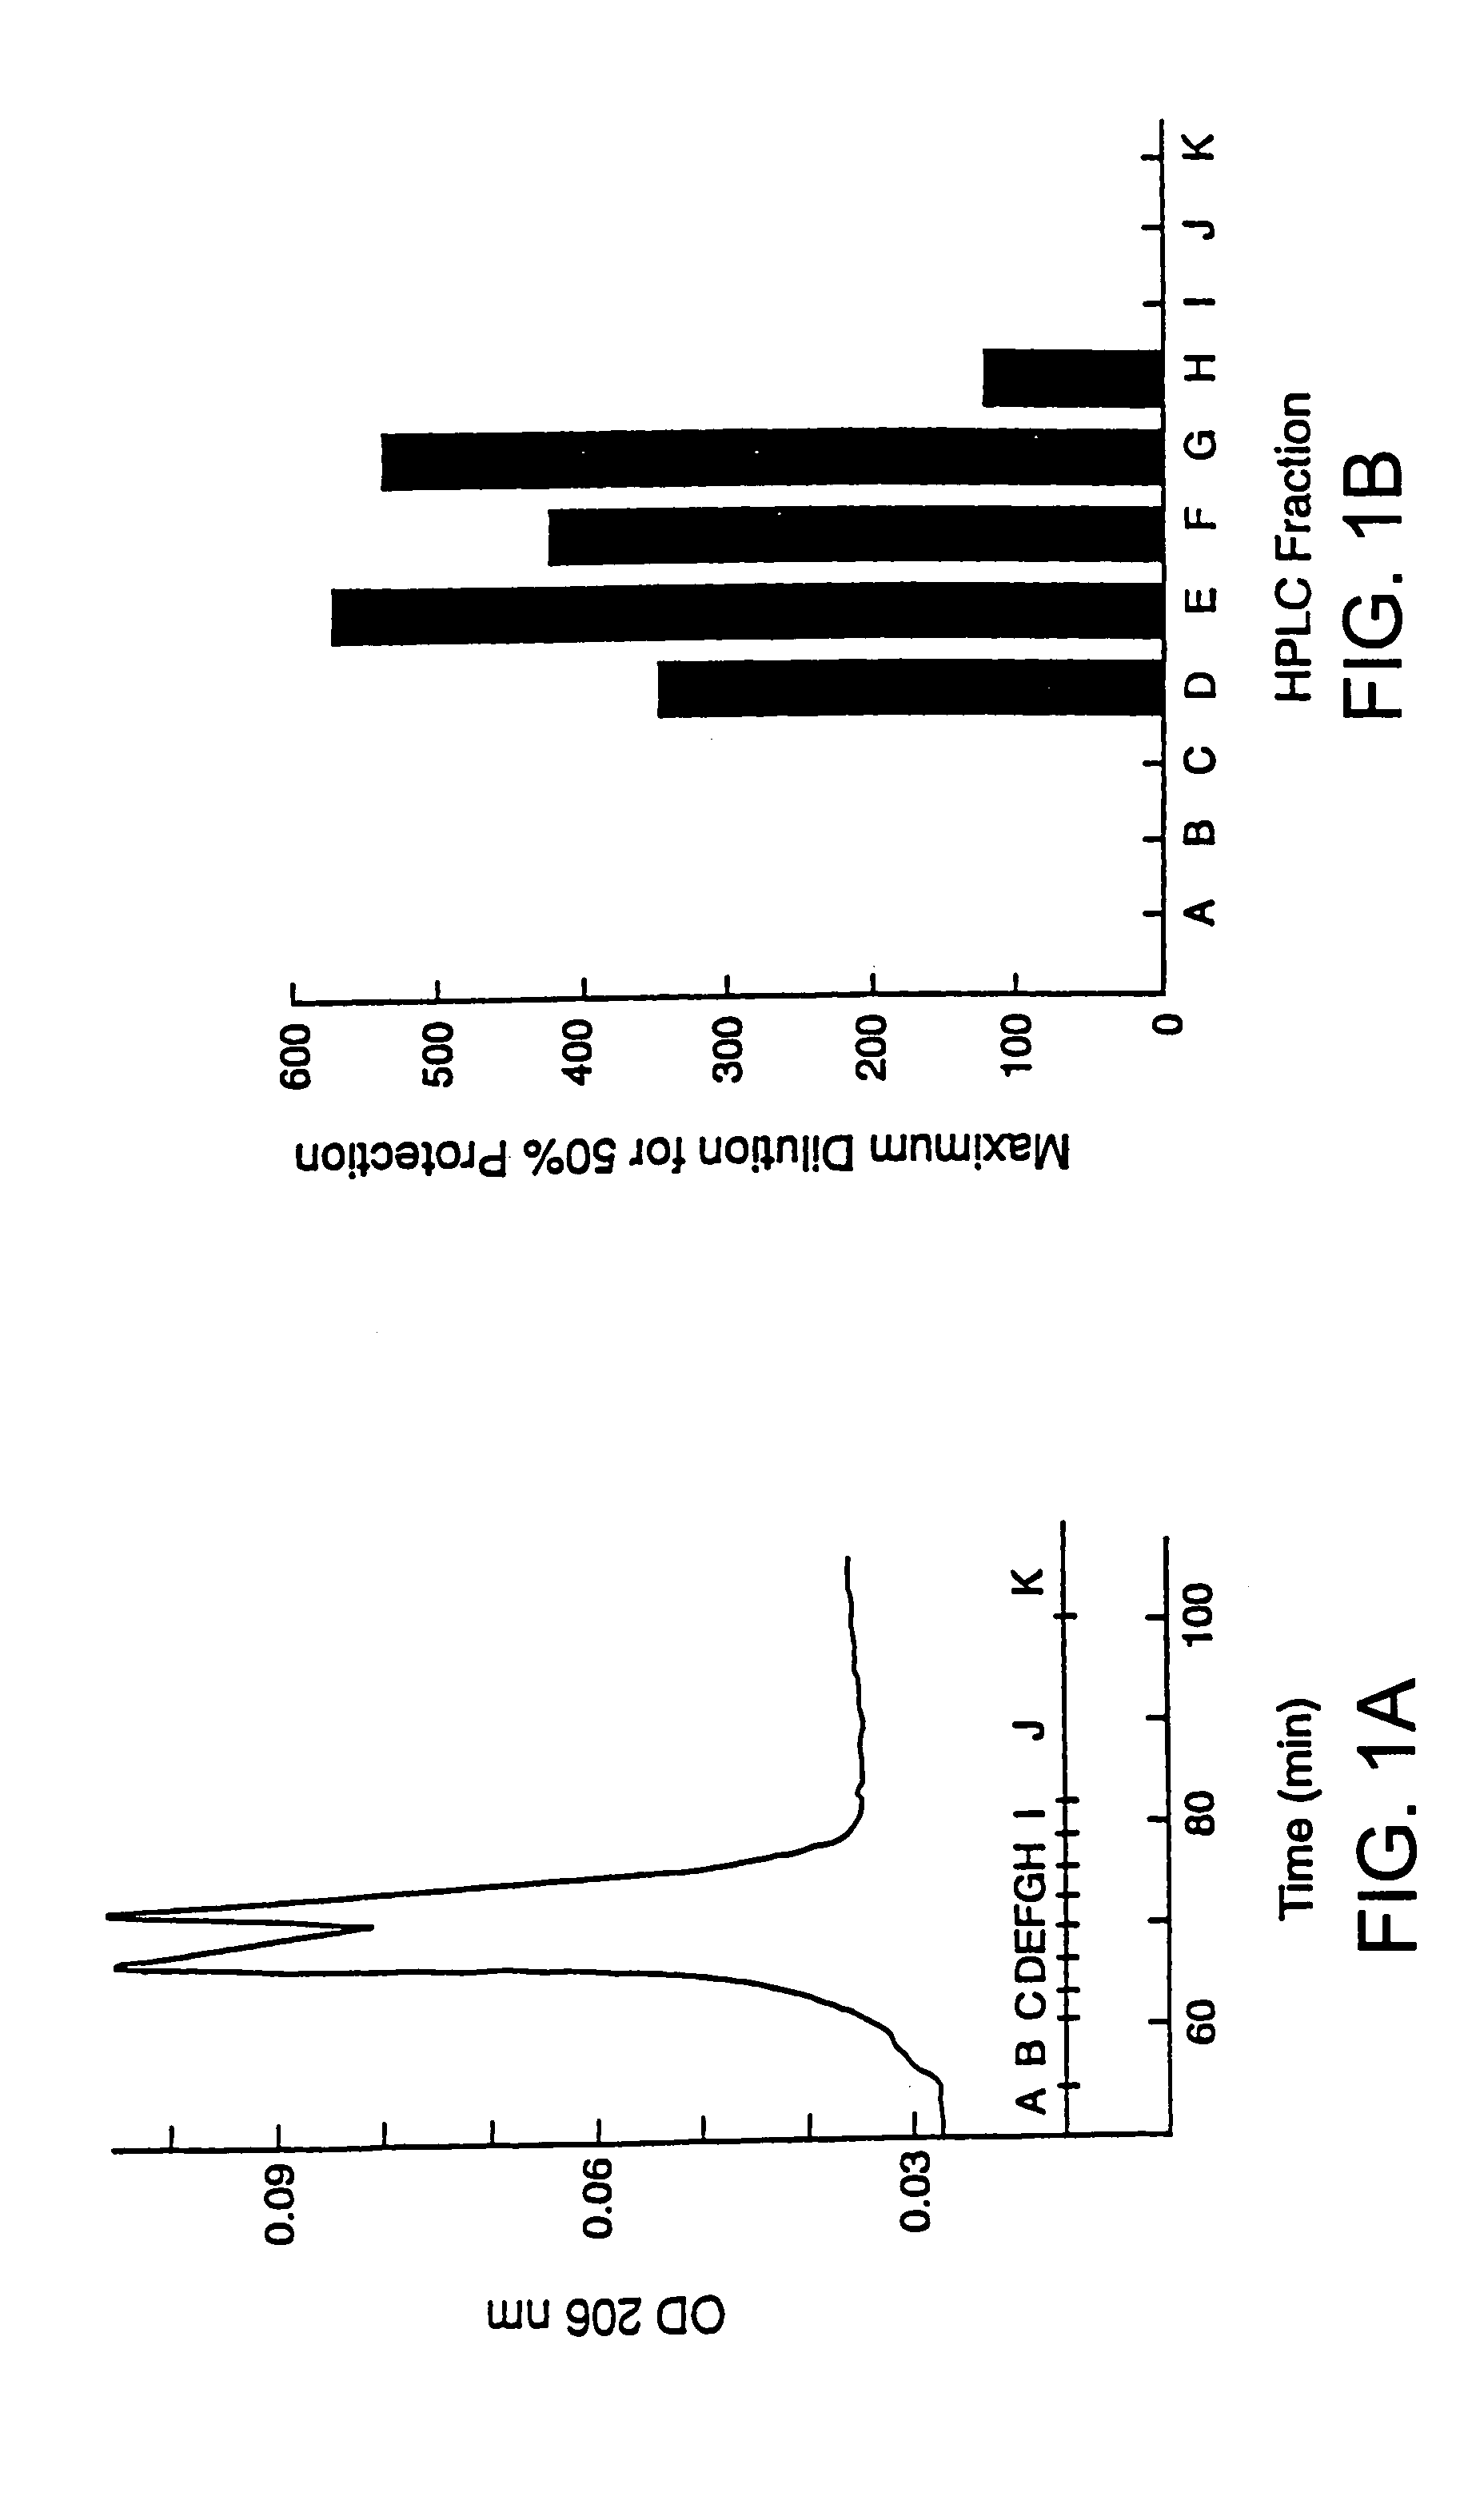 Glycosylation-resistant cyanovirins and related conjugates, compositions, nucleic acids, vectors, host cells, methods of production and methods of using nonglycosylated cyanovirins